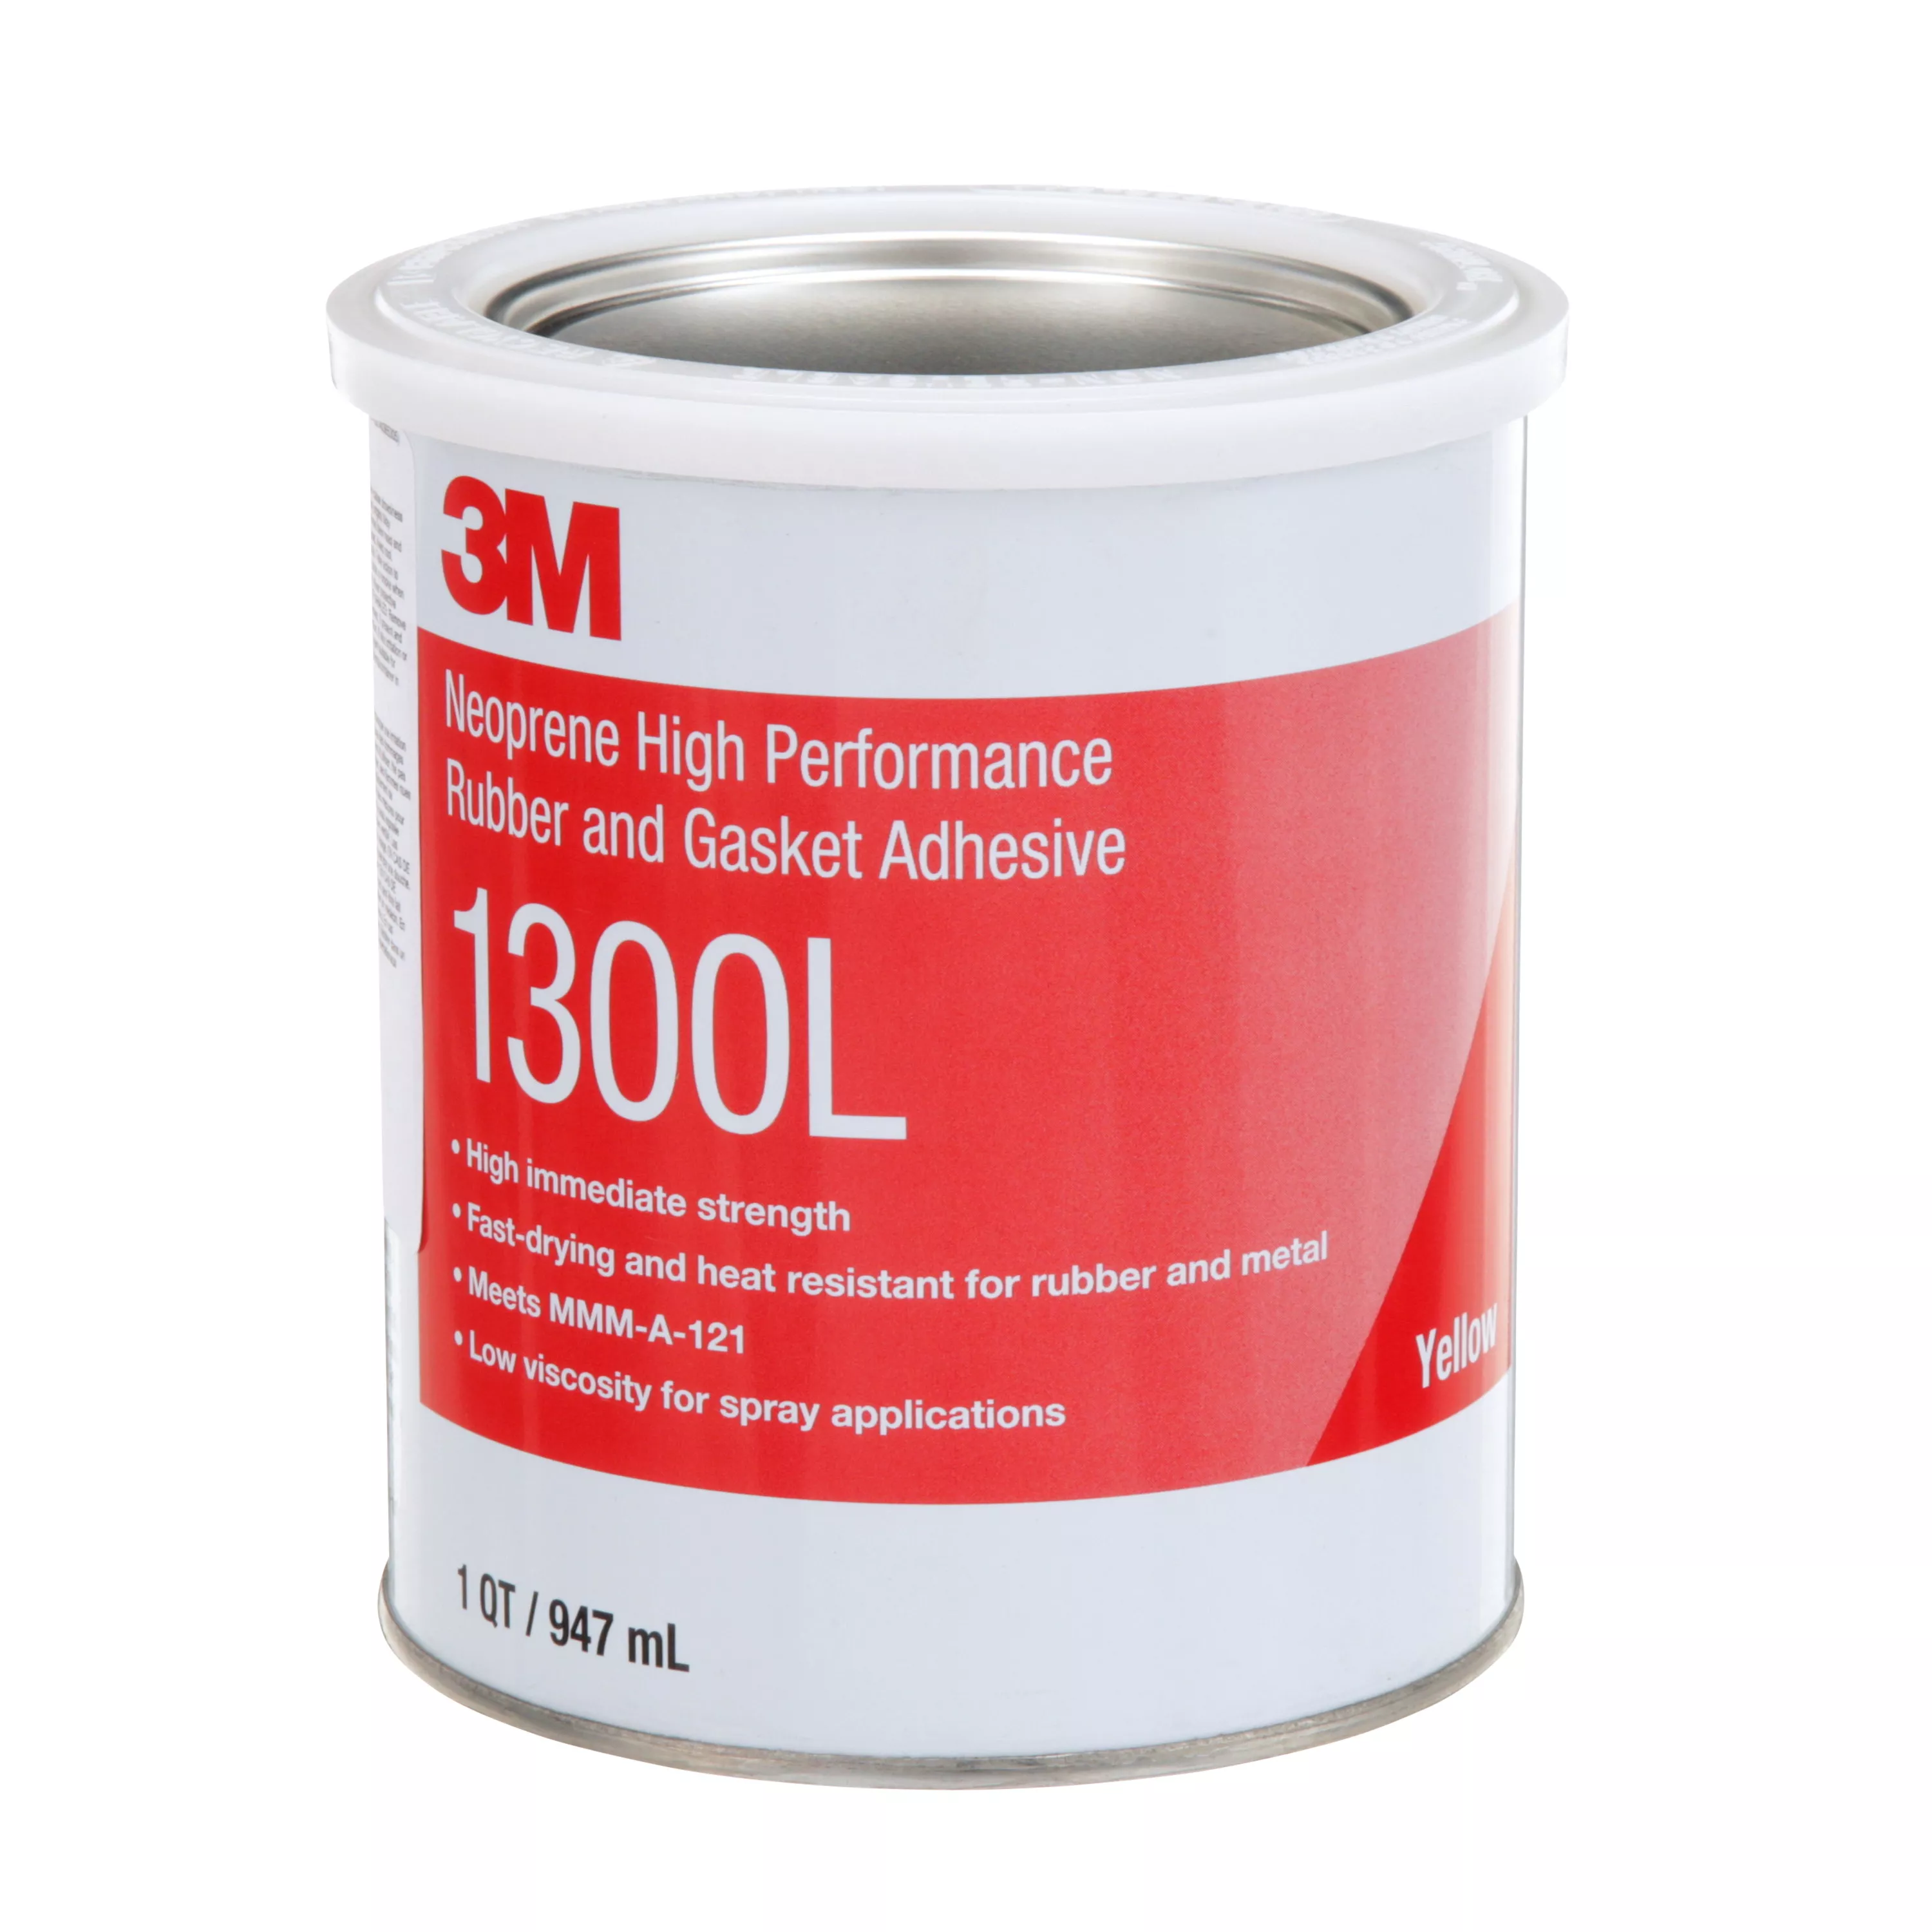 3M™ Neoprene High Performance Rubber and Gasket Adhesive 1300L, Yellow,
1 Quart, 12 Can/Case